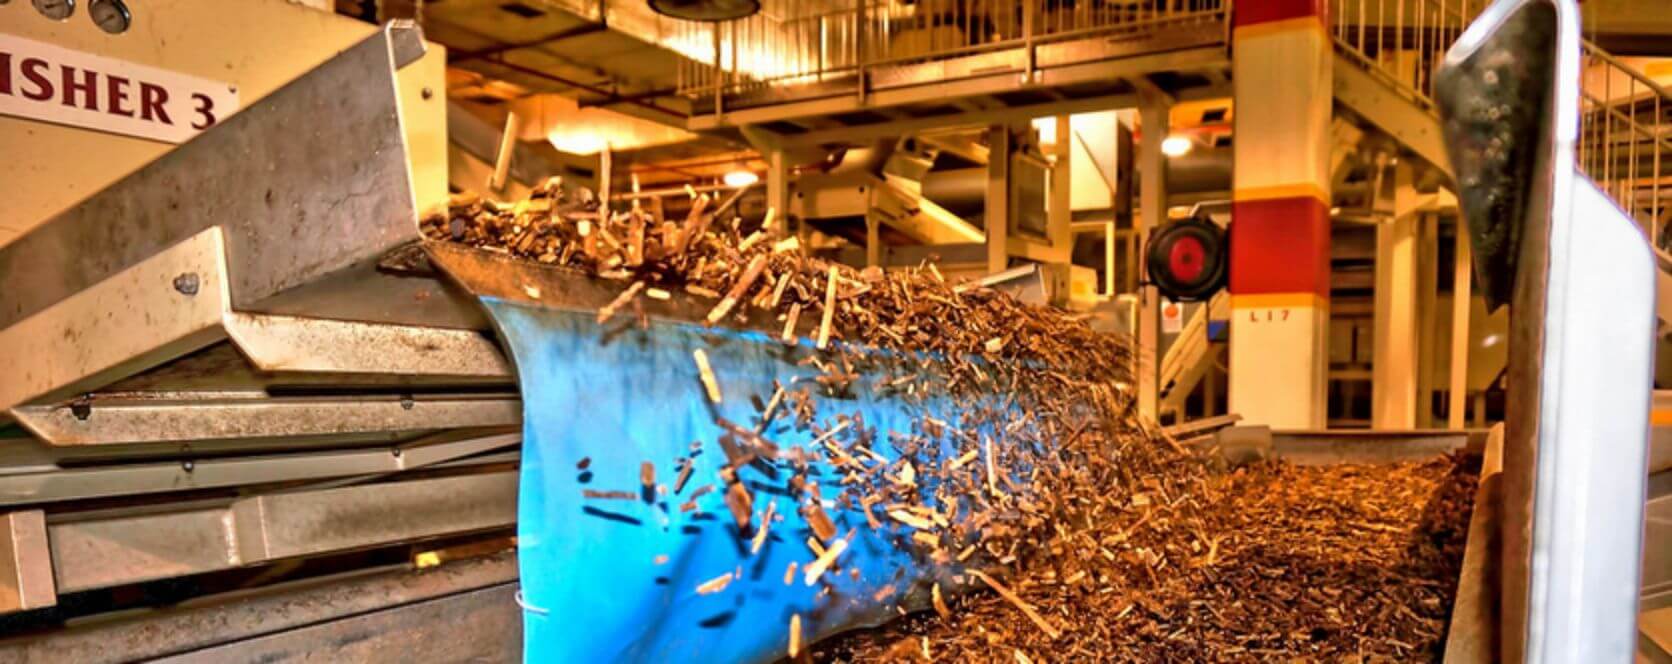 Crafting process of Expanded Shredded Stems Tobacco